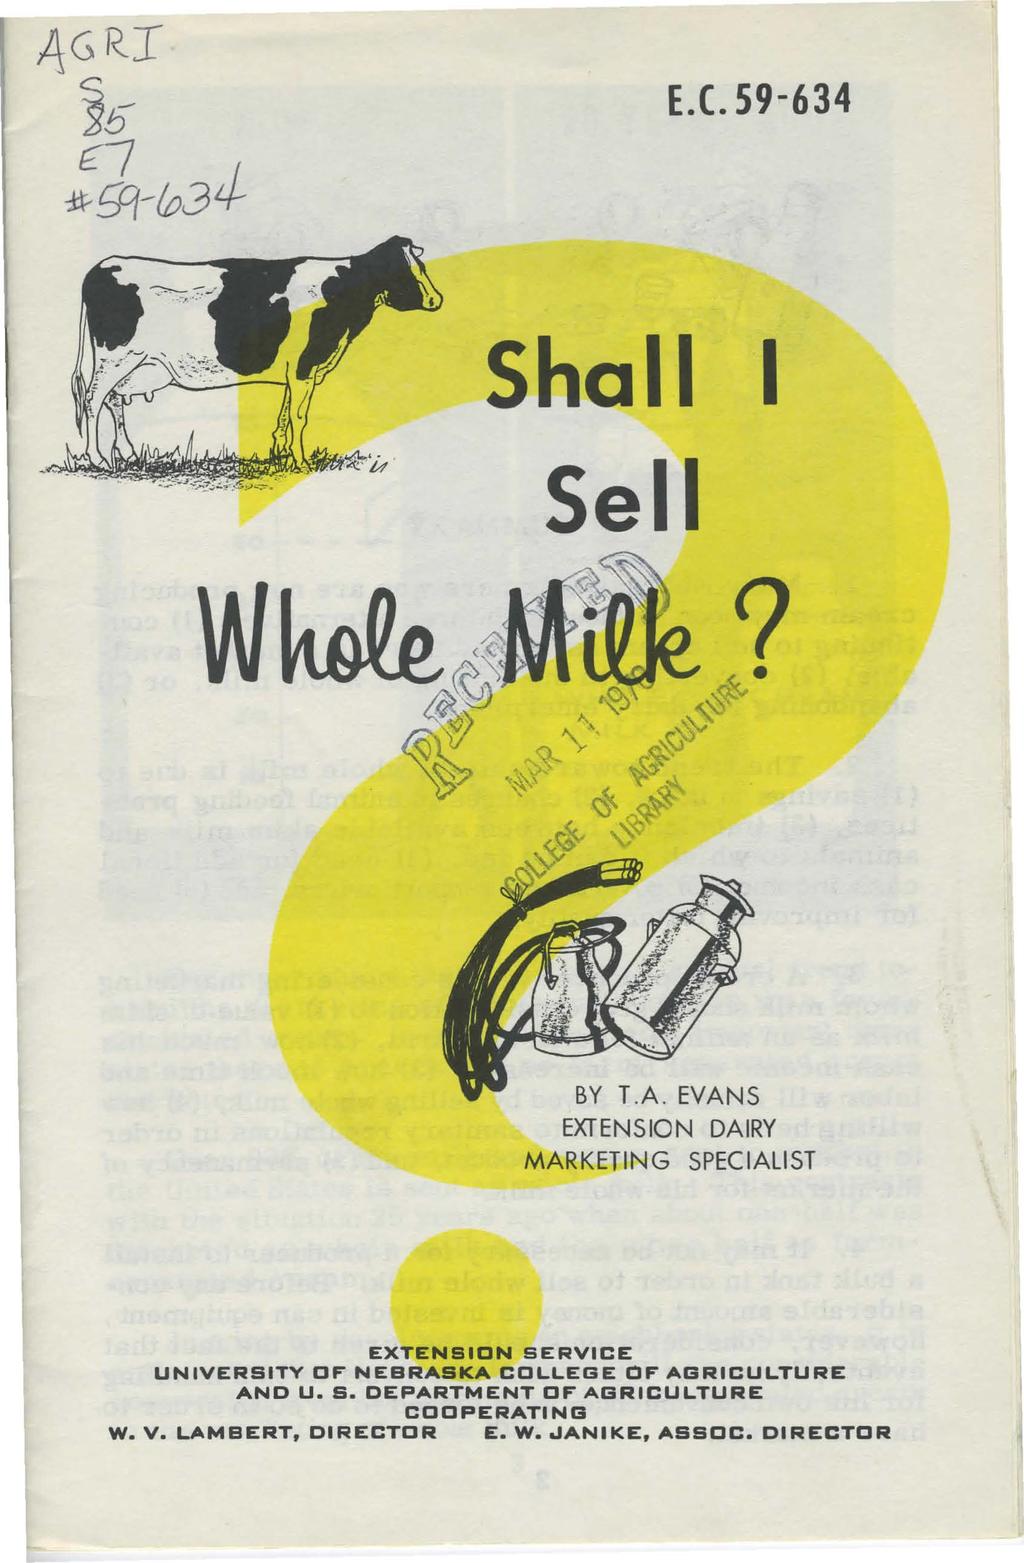 E.C. 59-634 Shall I Sell? BY T.A.